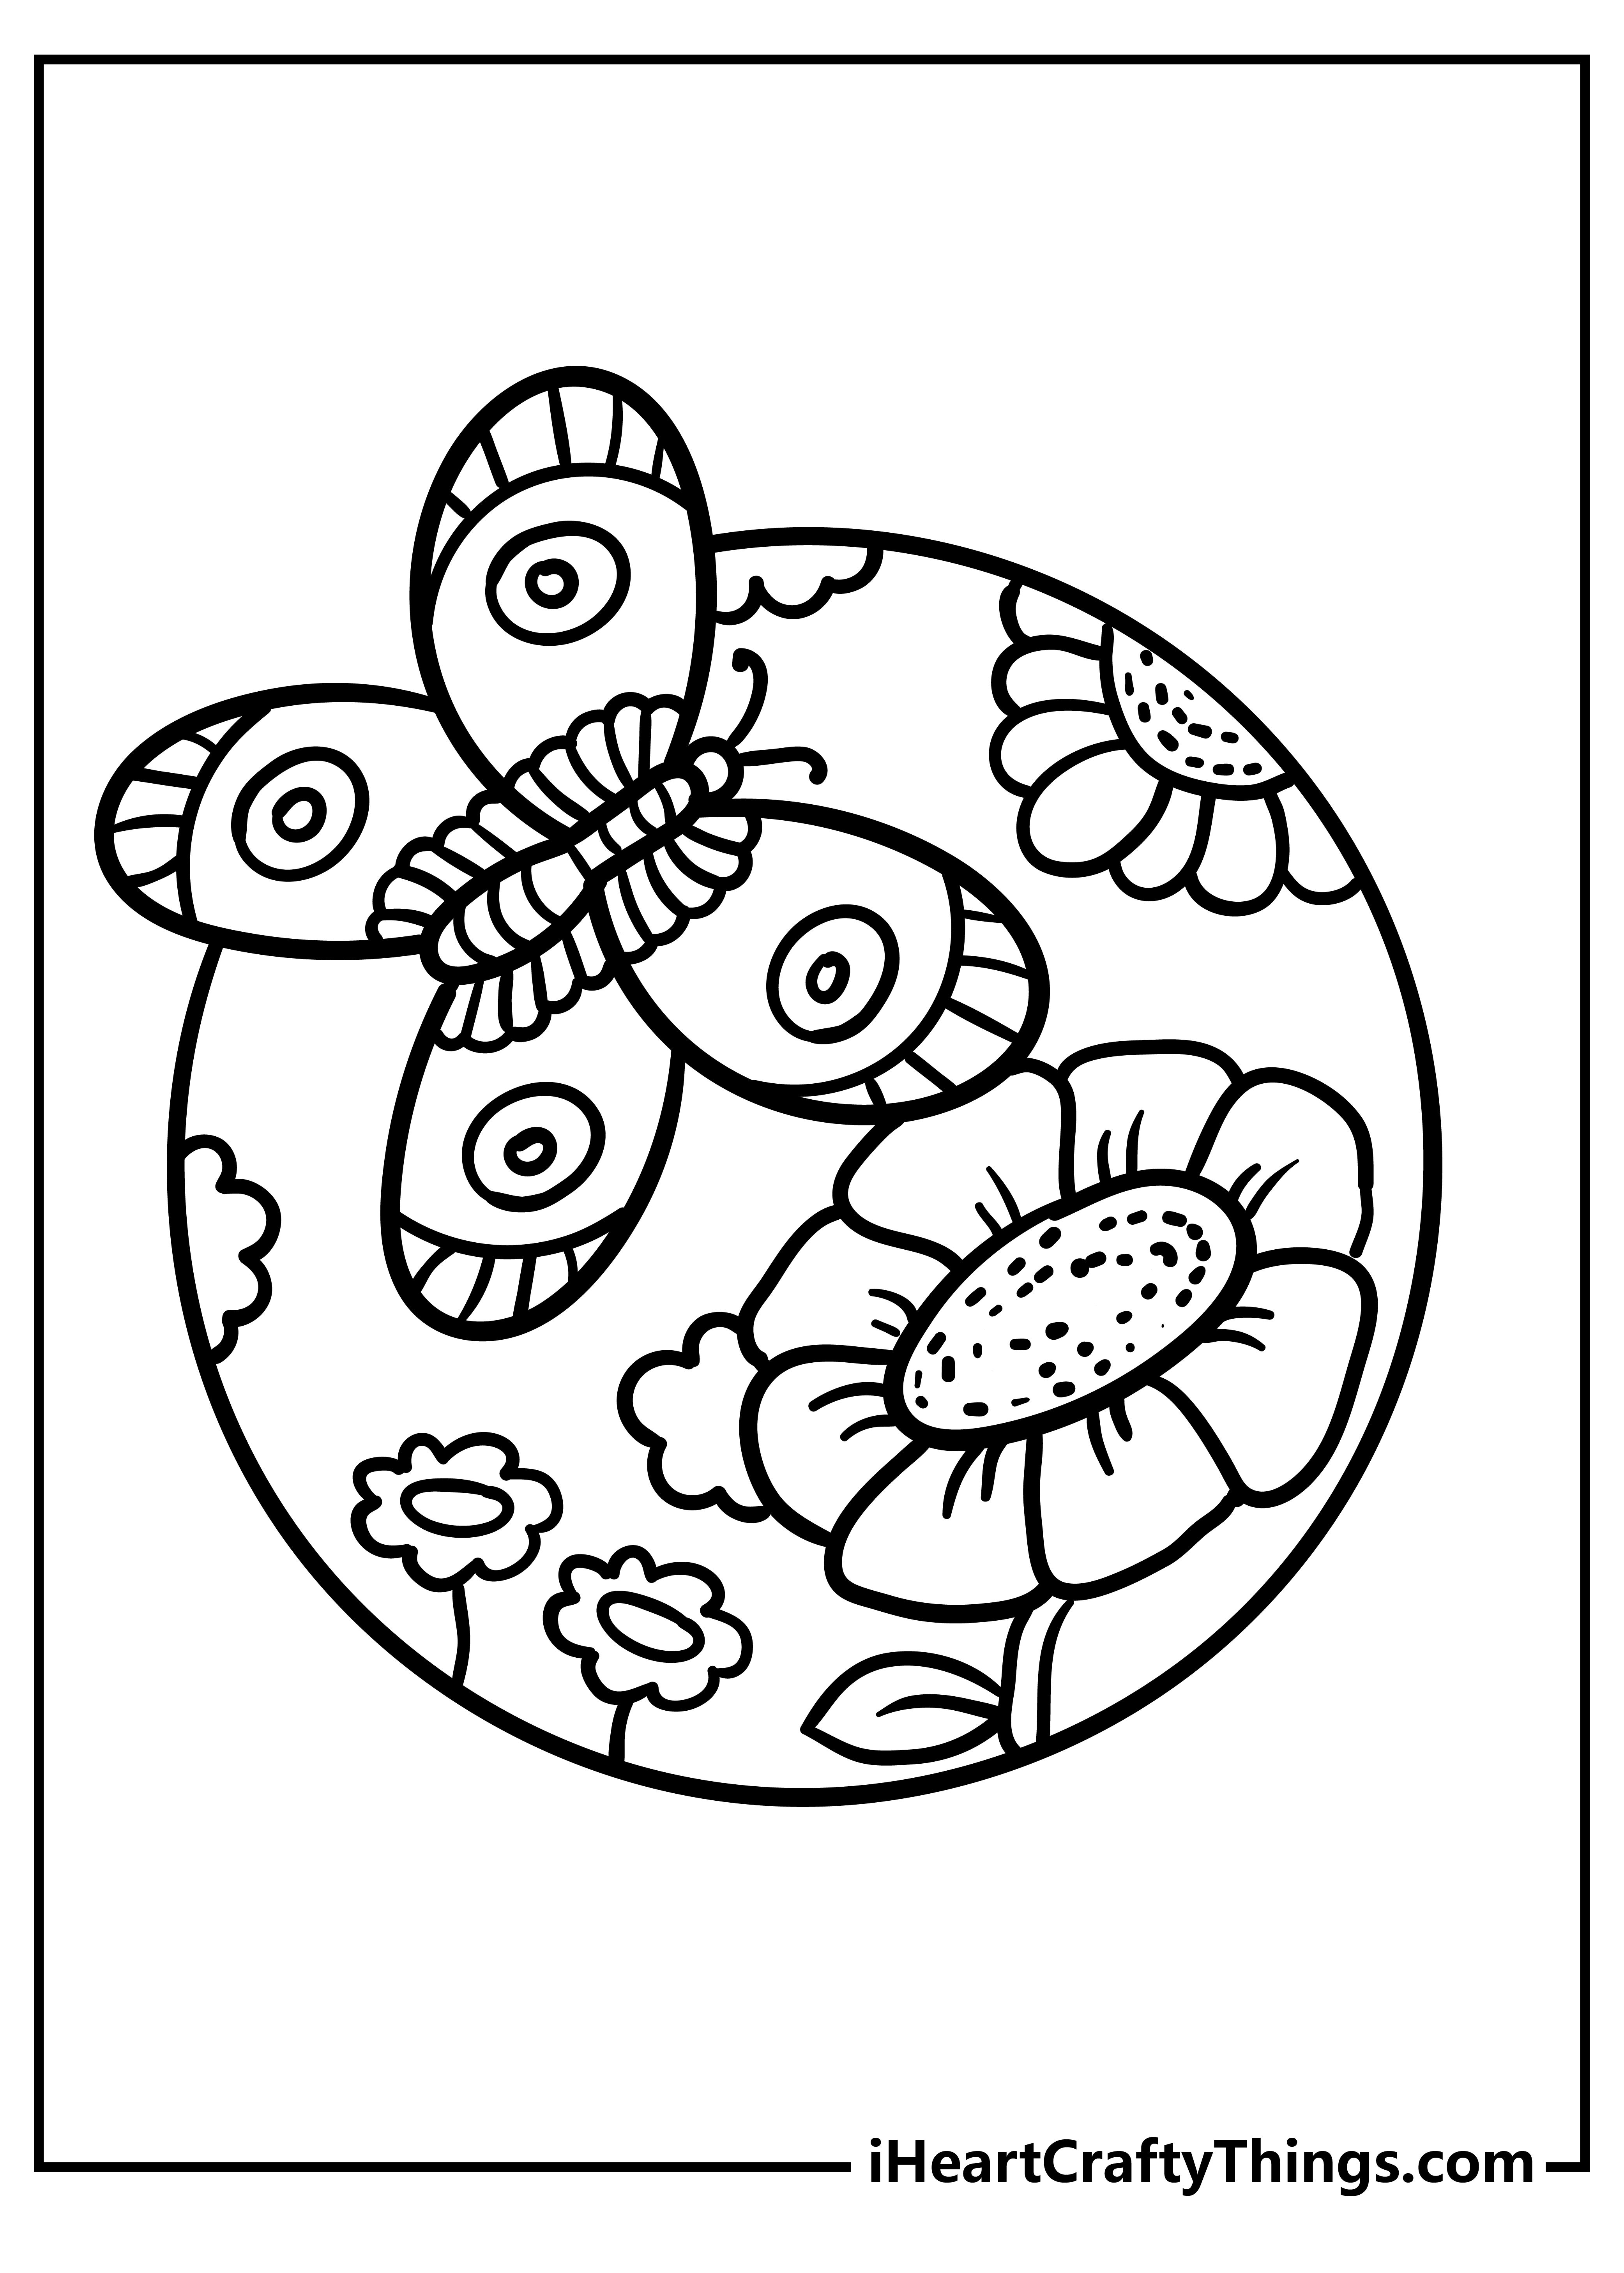 Printable Nature Coloring Pages Updated 20